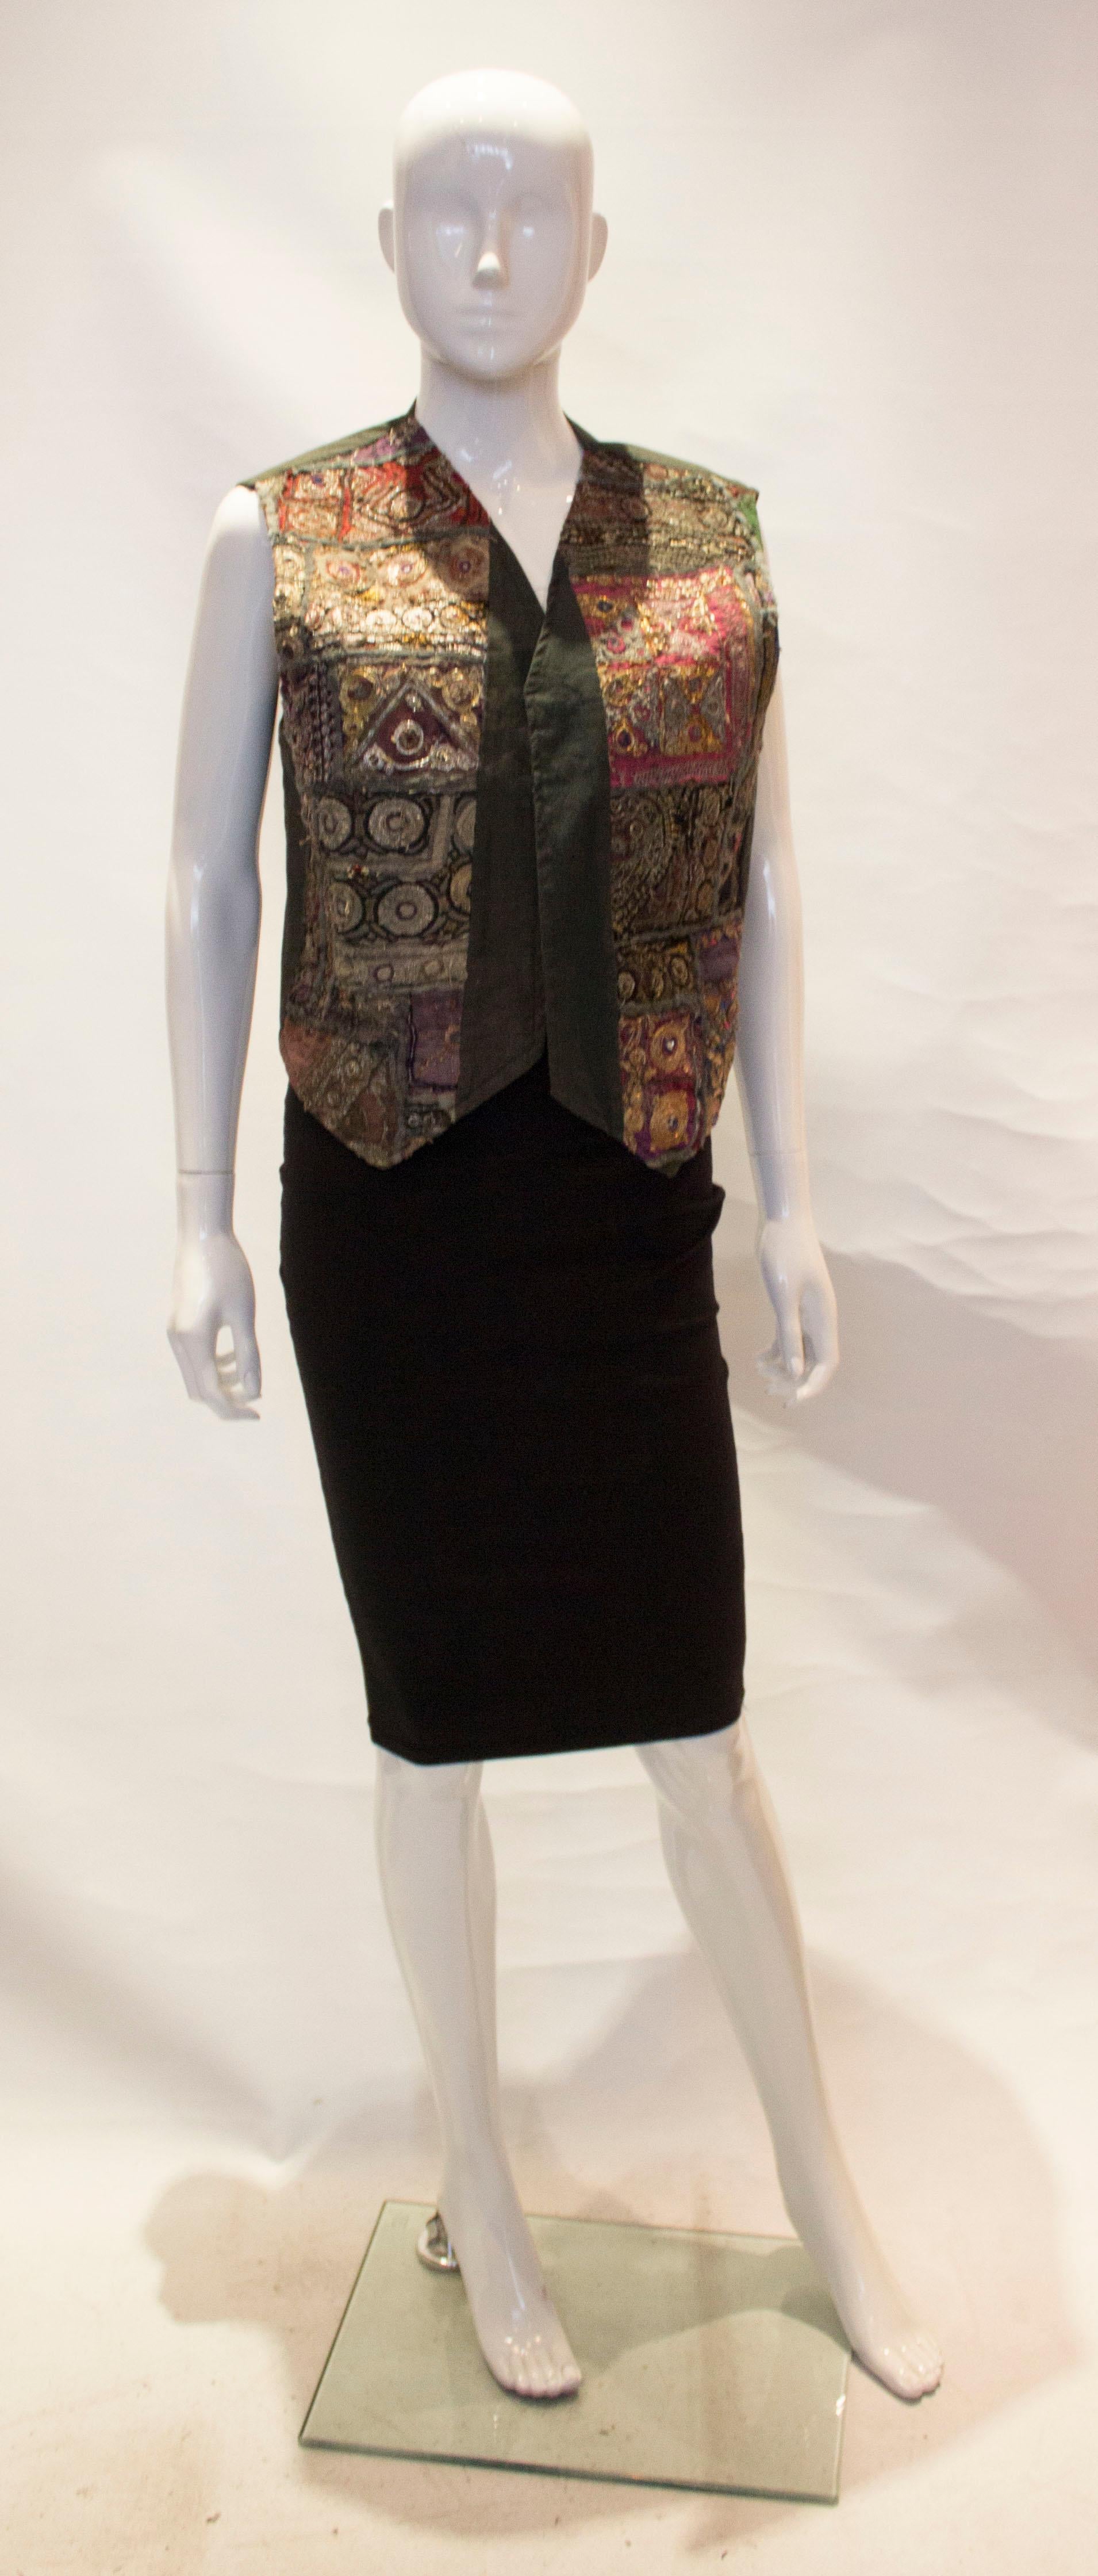 A fun and east to wear vintage Indian waistcoat. The fabric is a grey cotton with decoration on the front.